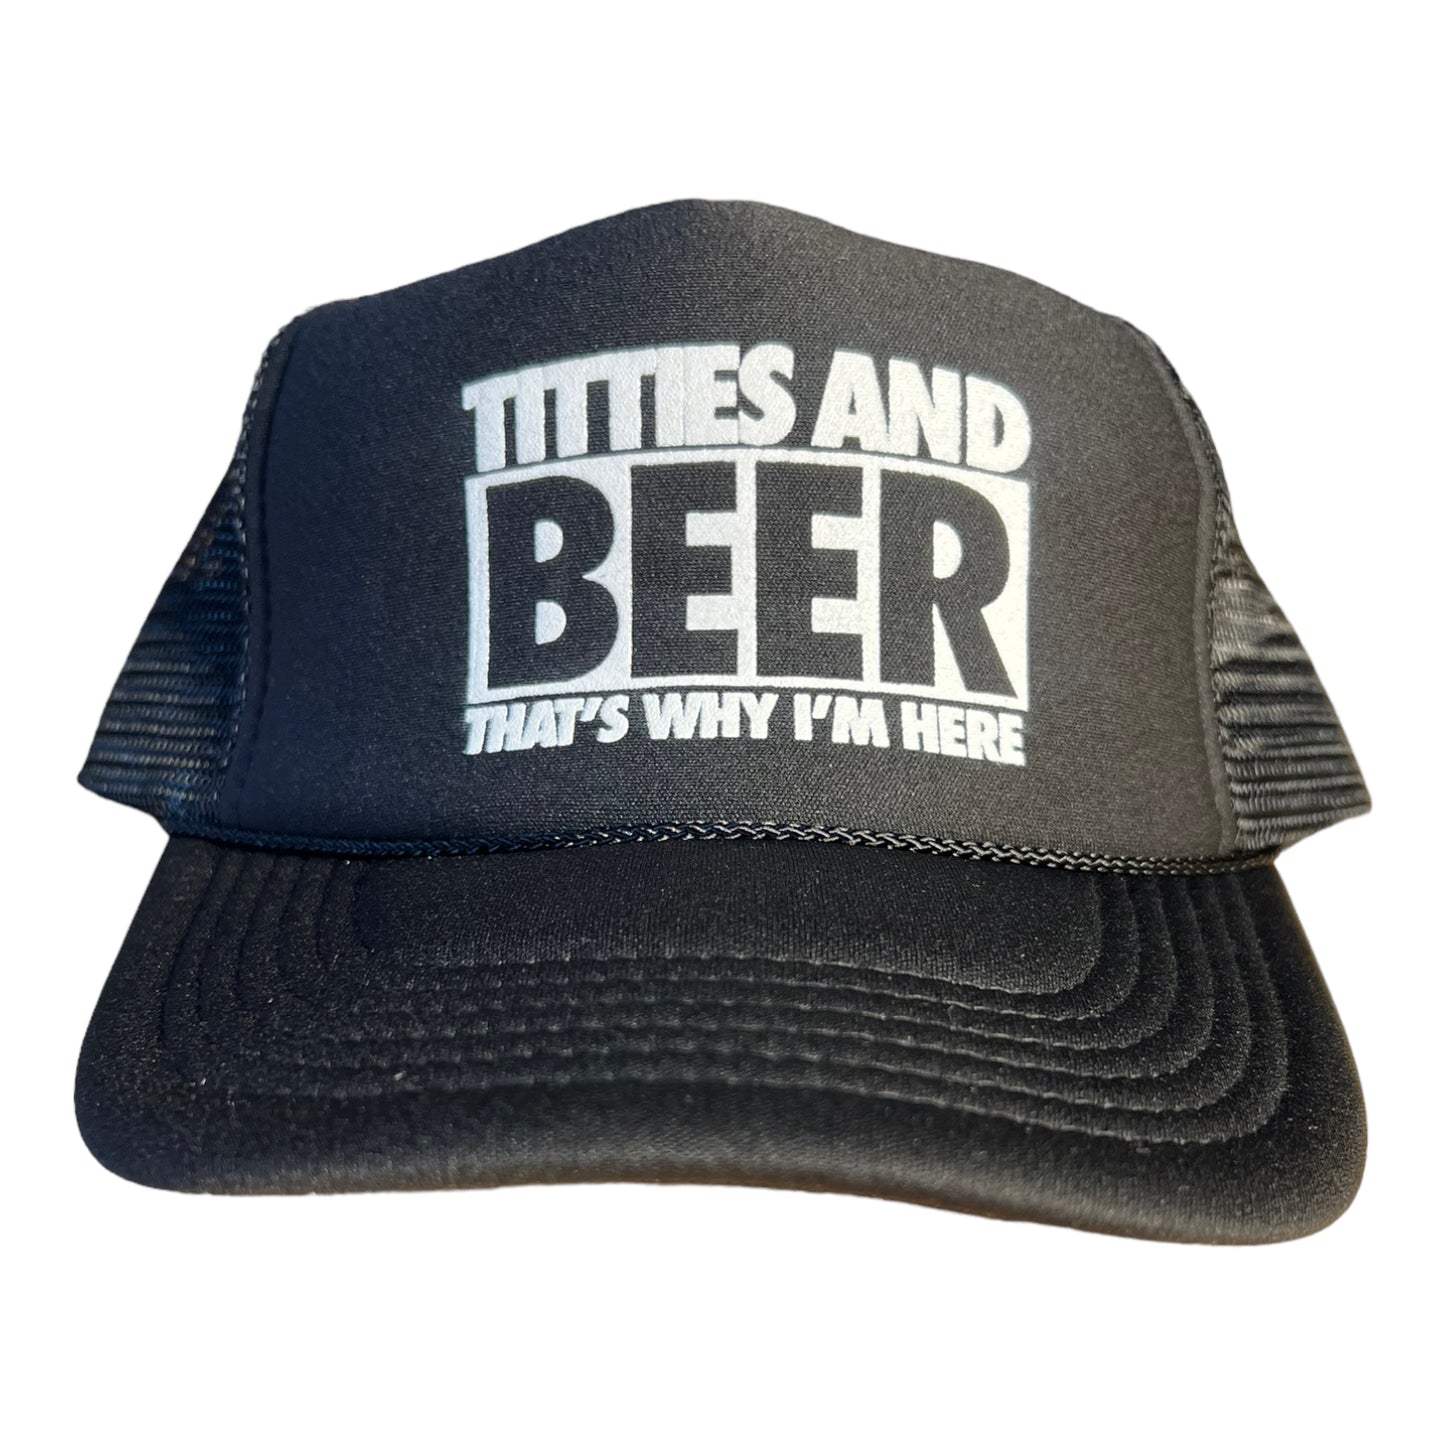 Titties and Beer That's Why I'm Here Trucker Hat Funny Trucker Hat Black